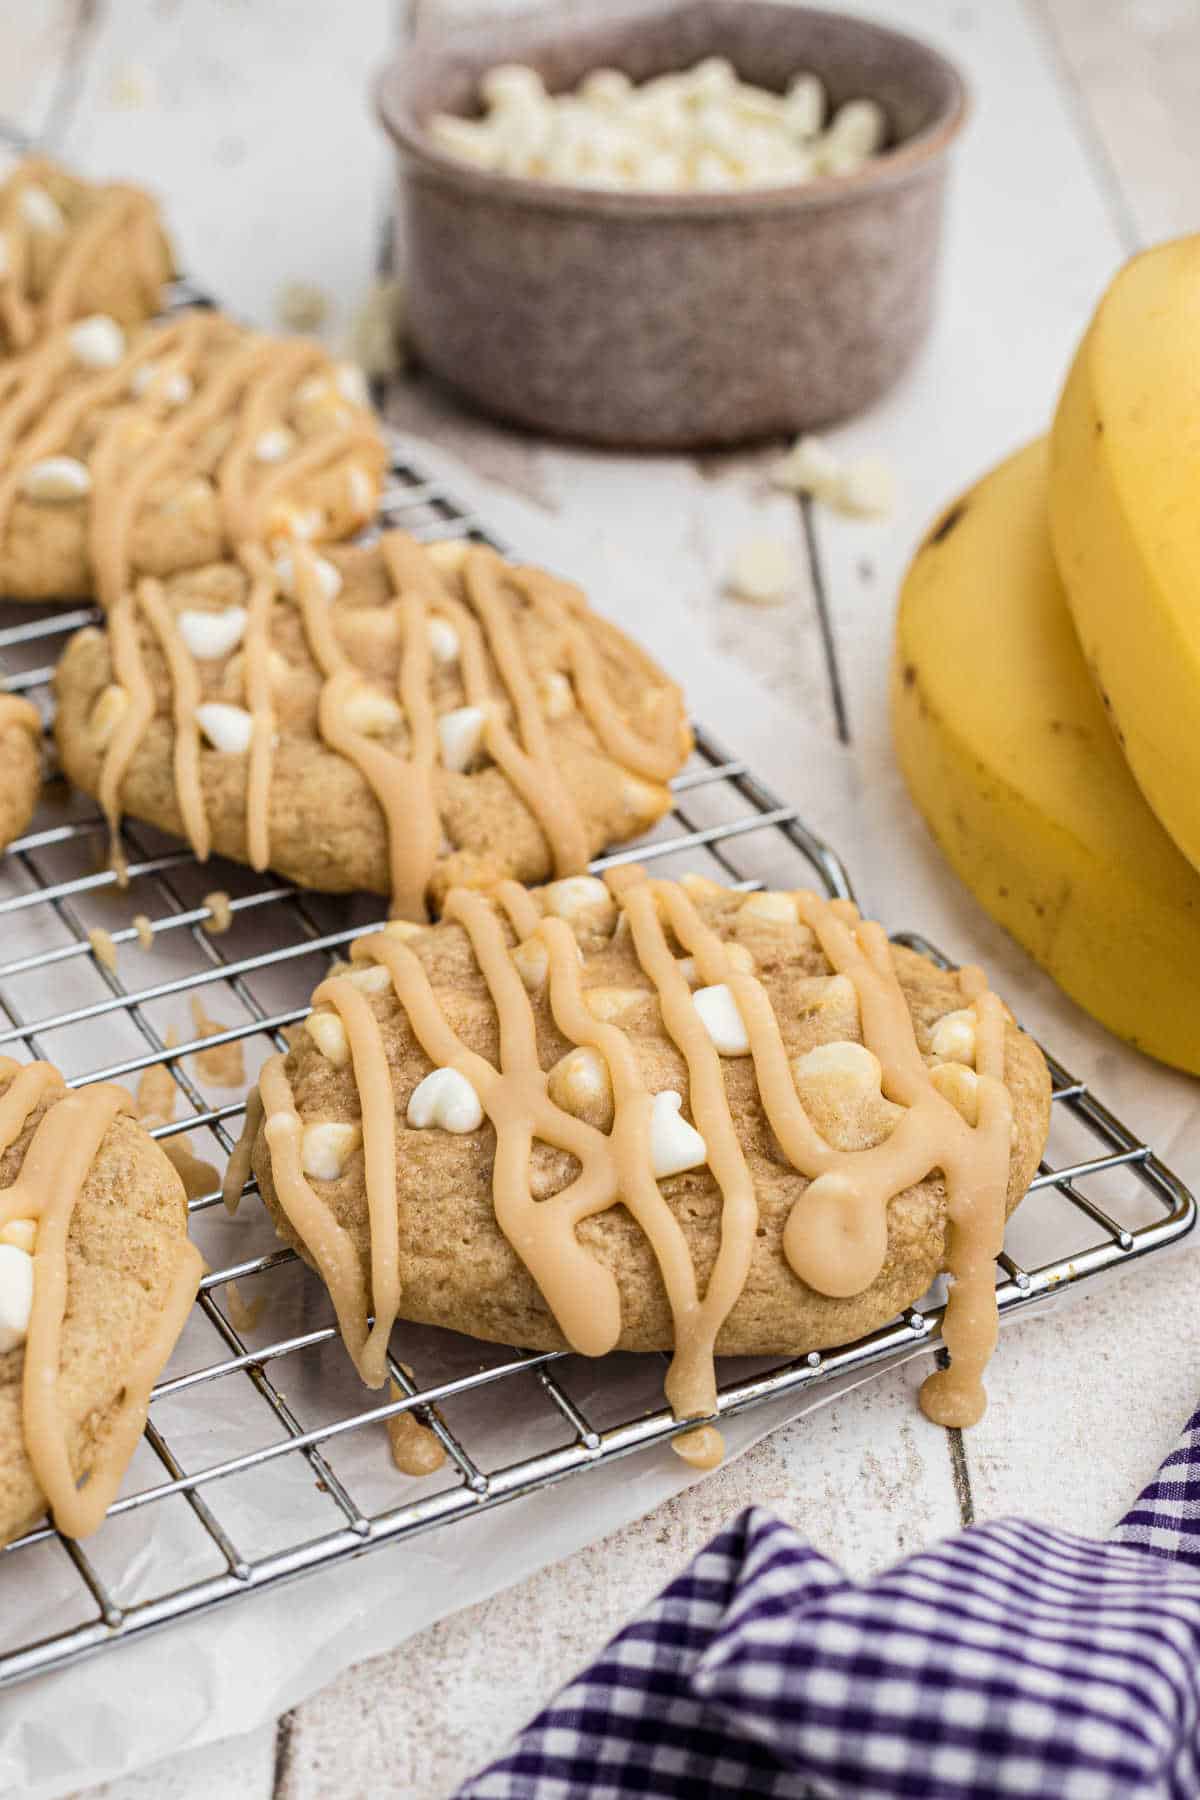 Side angle of a cooling rack with some bananas foster cookies.